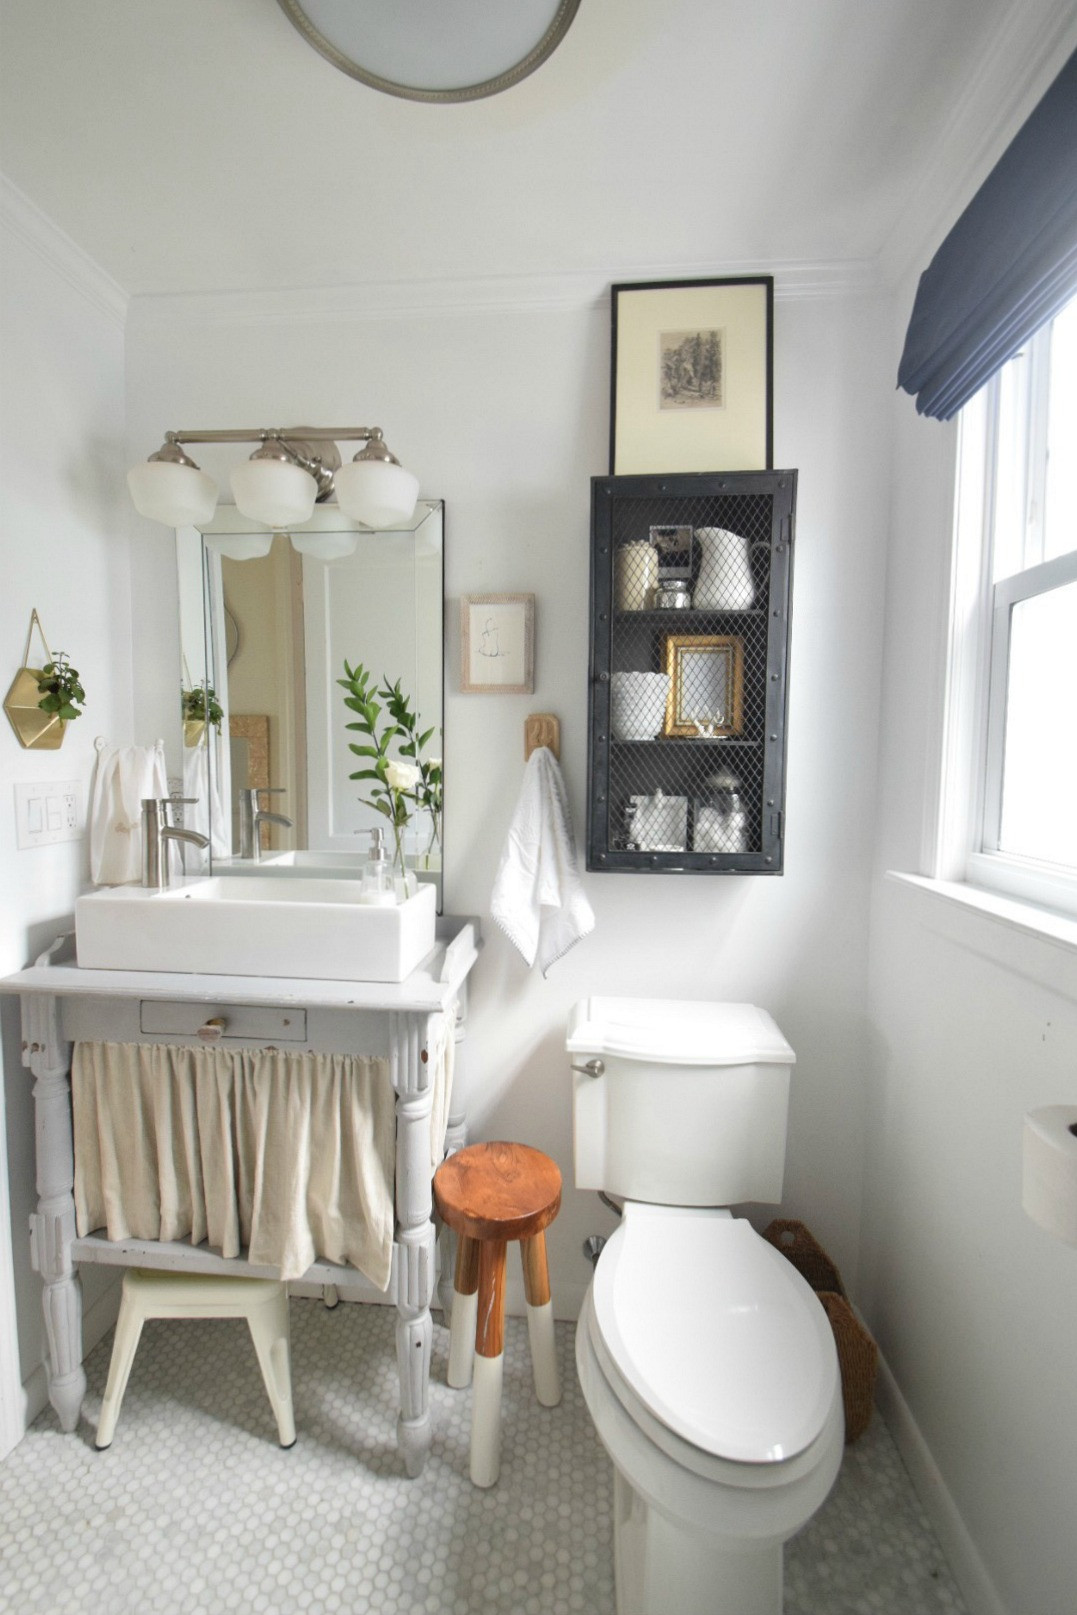 Bathroom Storage Ideas
 Small Bathroom Ideas and Solutions in our Tiny Cape